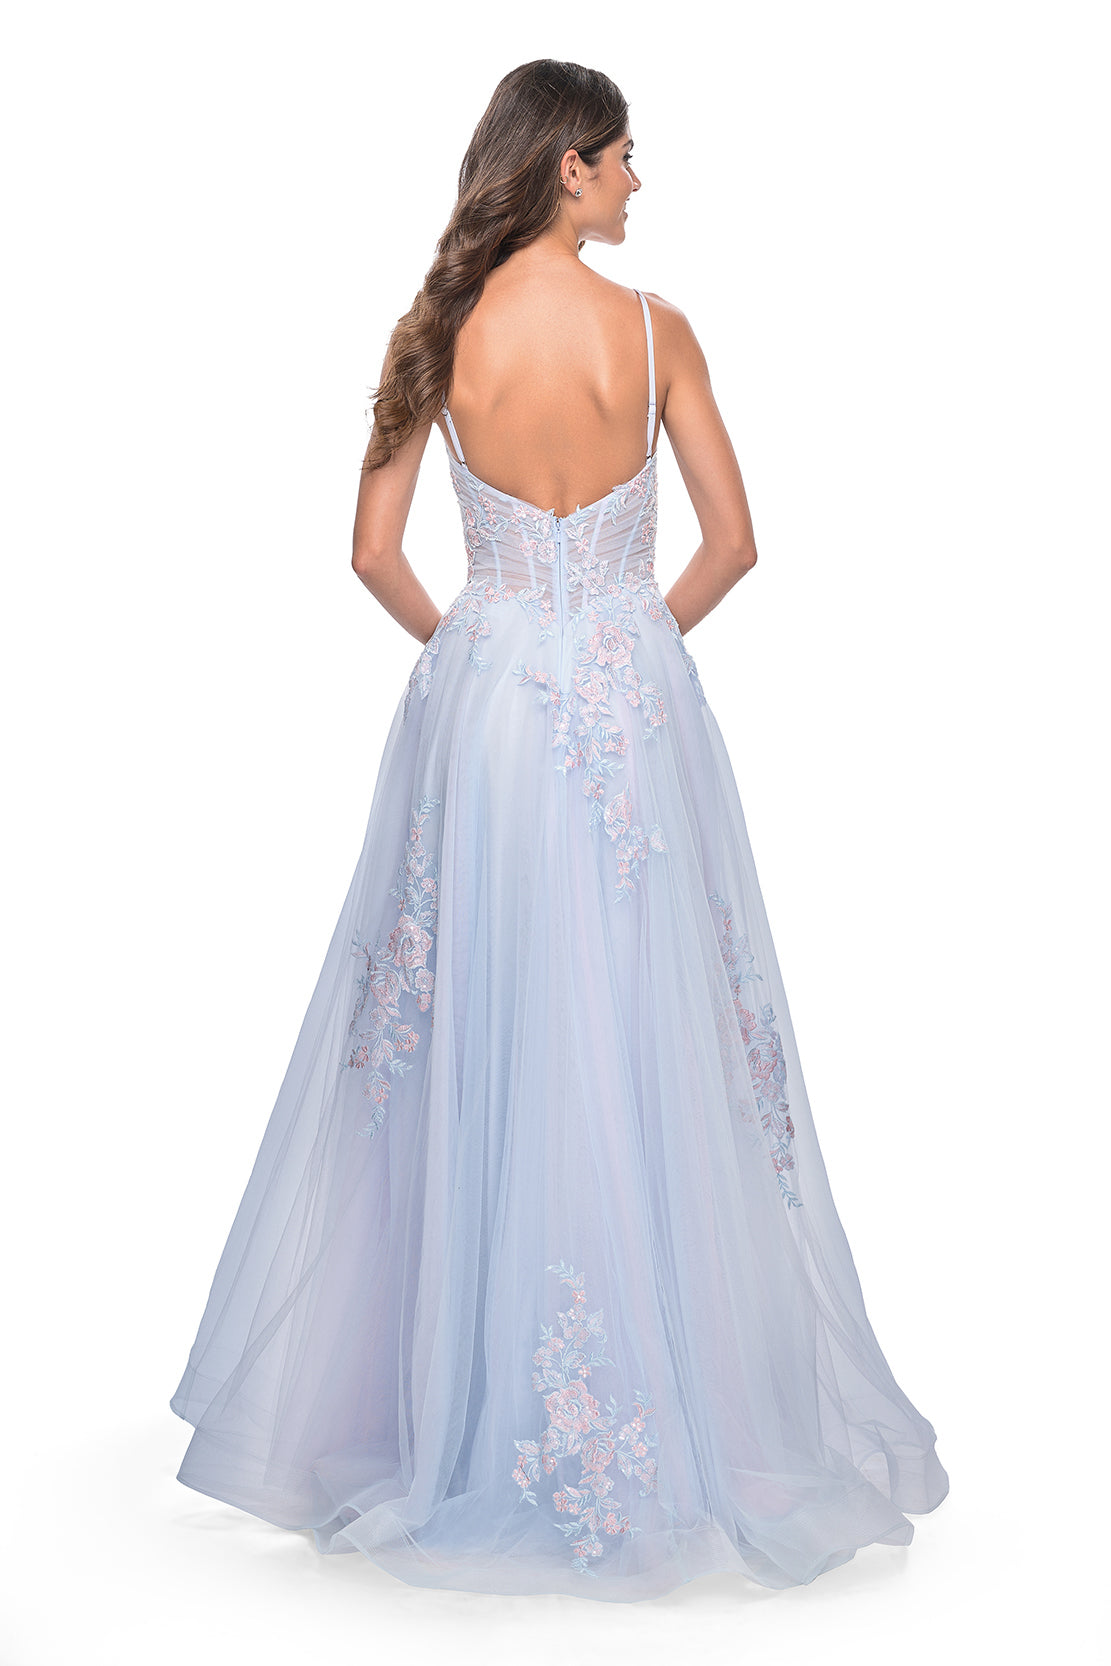 La Femme 31939 Scattered Lace Applique A-Line Prom Gown - An enchanting A-line gown featuring two-color scattered lace applique on tulle, with an illusion waist and boning detail for a magical and captivating prom look. Model is wearing the dress in the color light blue.